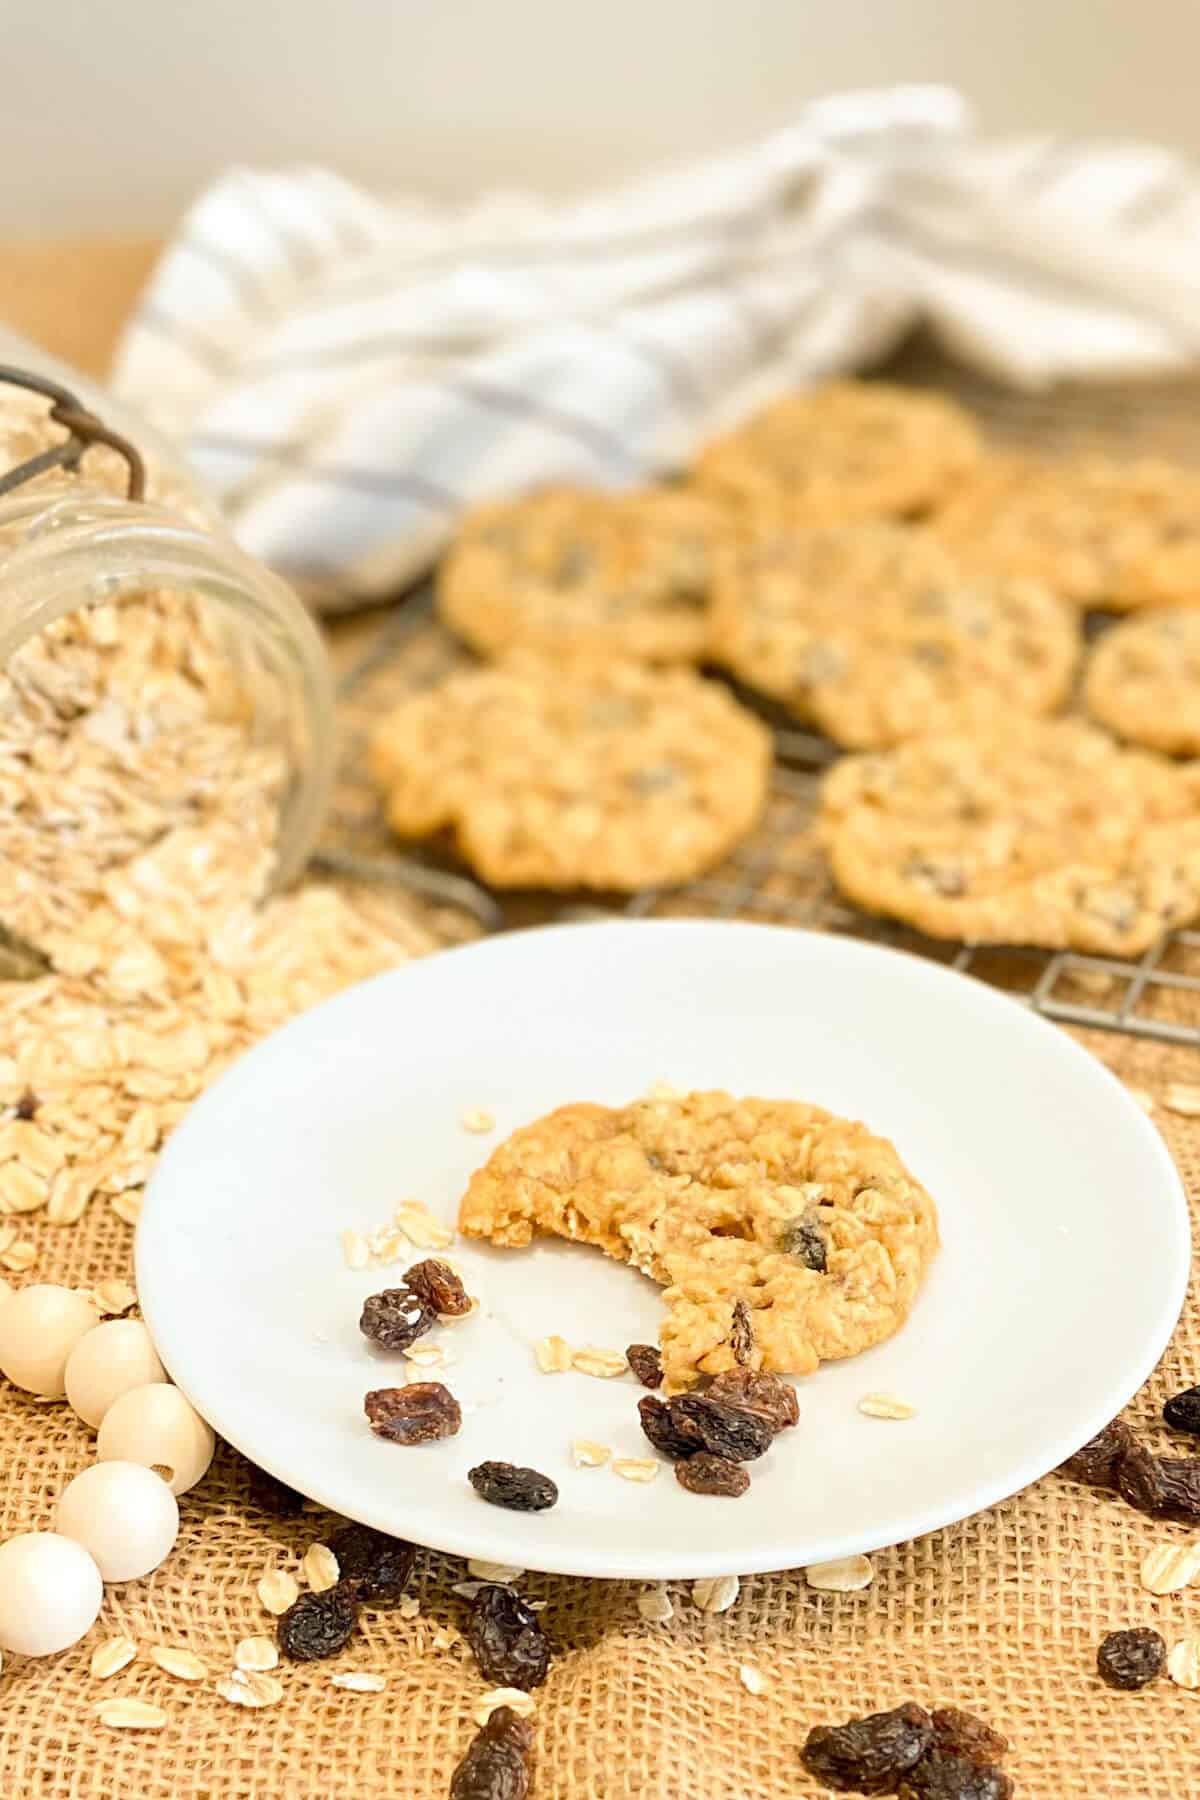 Cookie on a plate, with more on cooling rack, and oats on table.